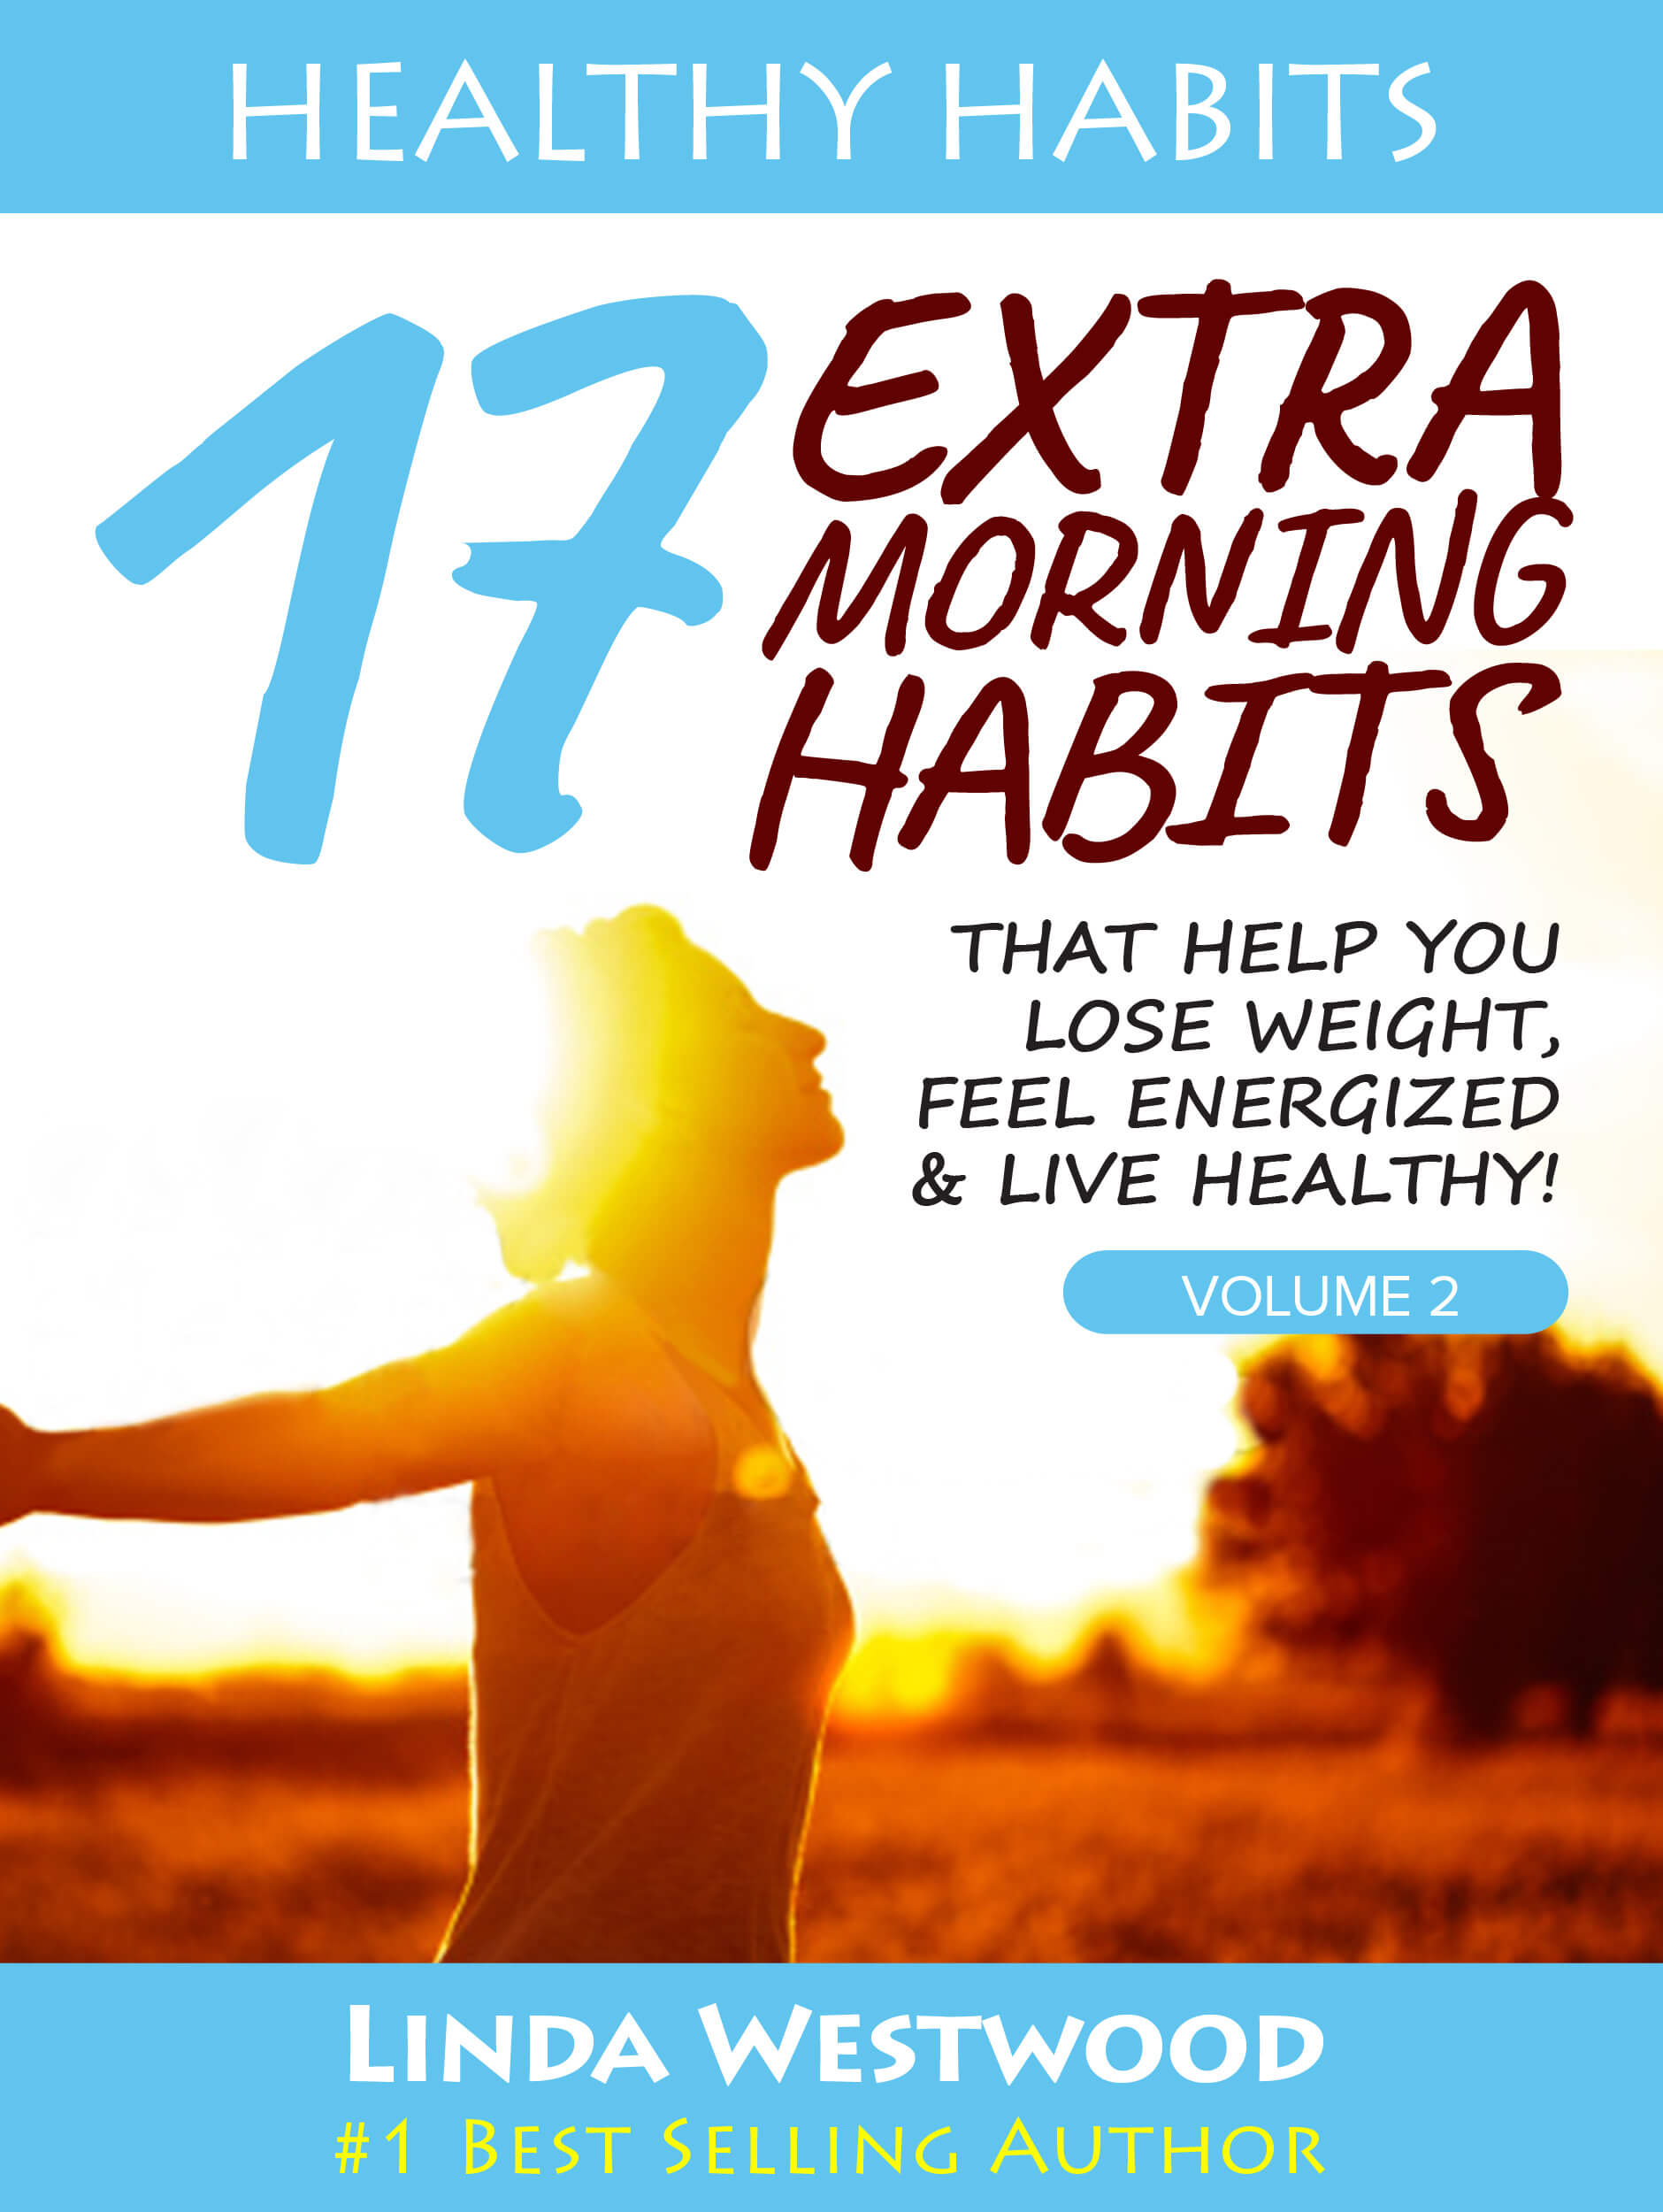 FREE: Healthy Habits Vol 2: 17 EXTRA Morning Habits That Help You Lose Weight, Feel Energized & Live Healthy! by Linda Westwood